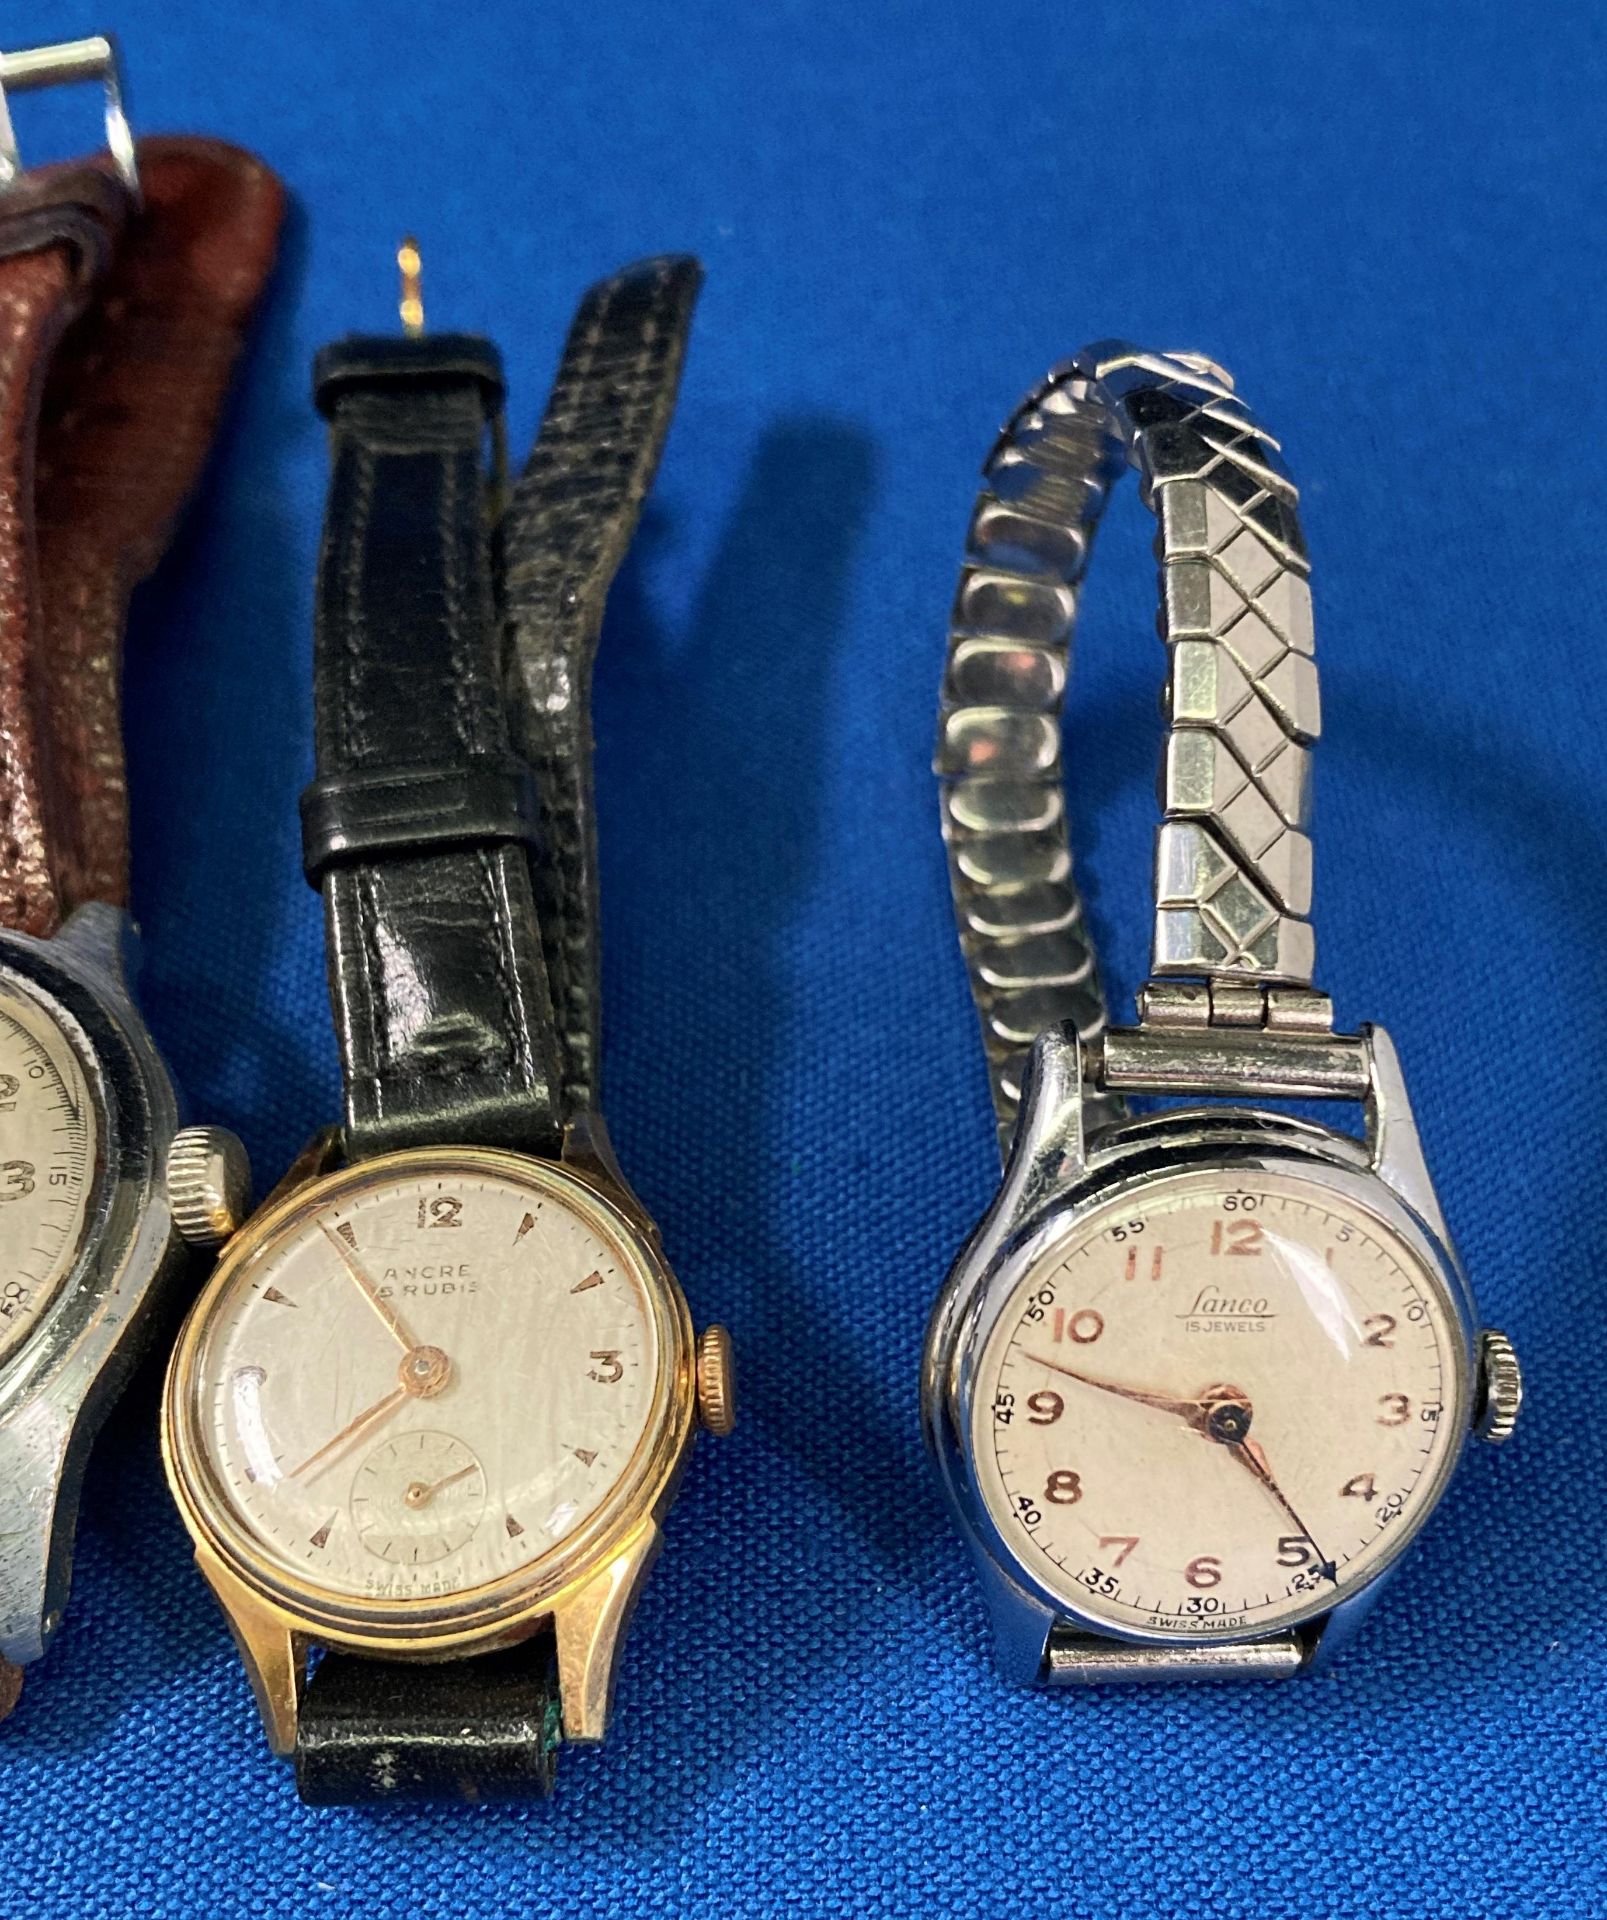 Four watches including an Ancre 15 Rubis gold/gold-plated watch (not tested - no visible hallmark) - Image 3 of 3